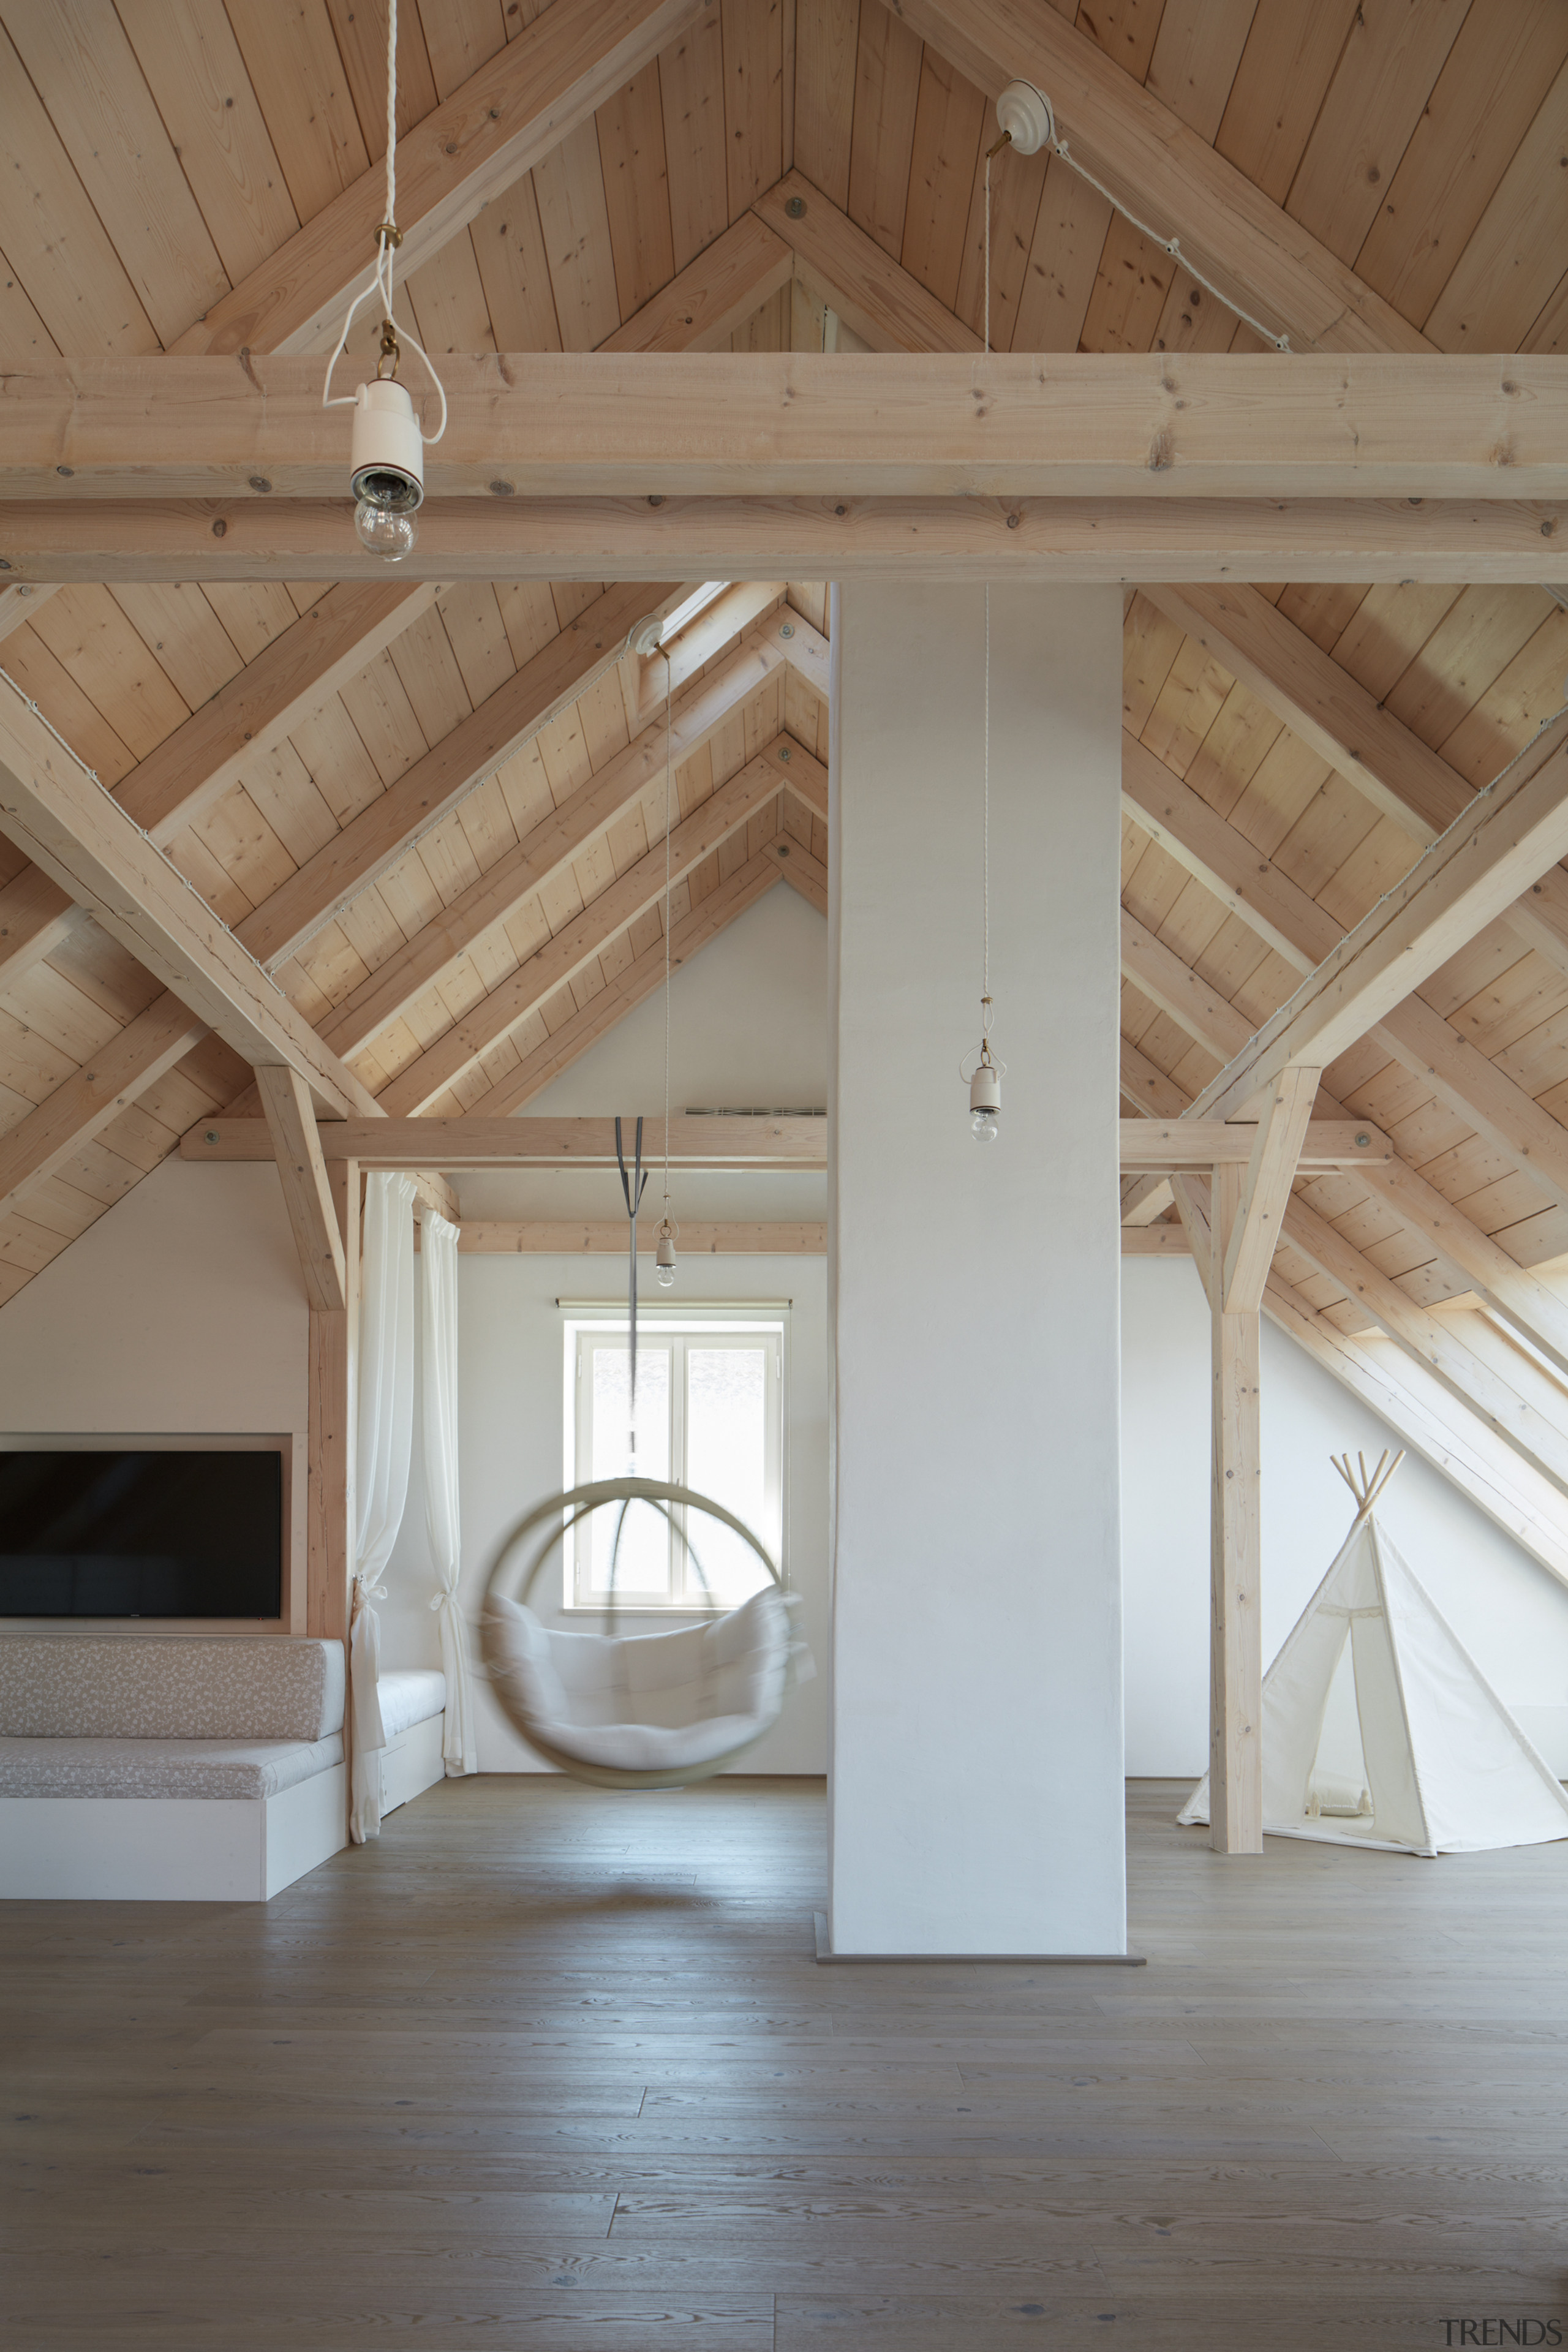 The gabled roof form translated into soaring ceilings 